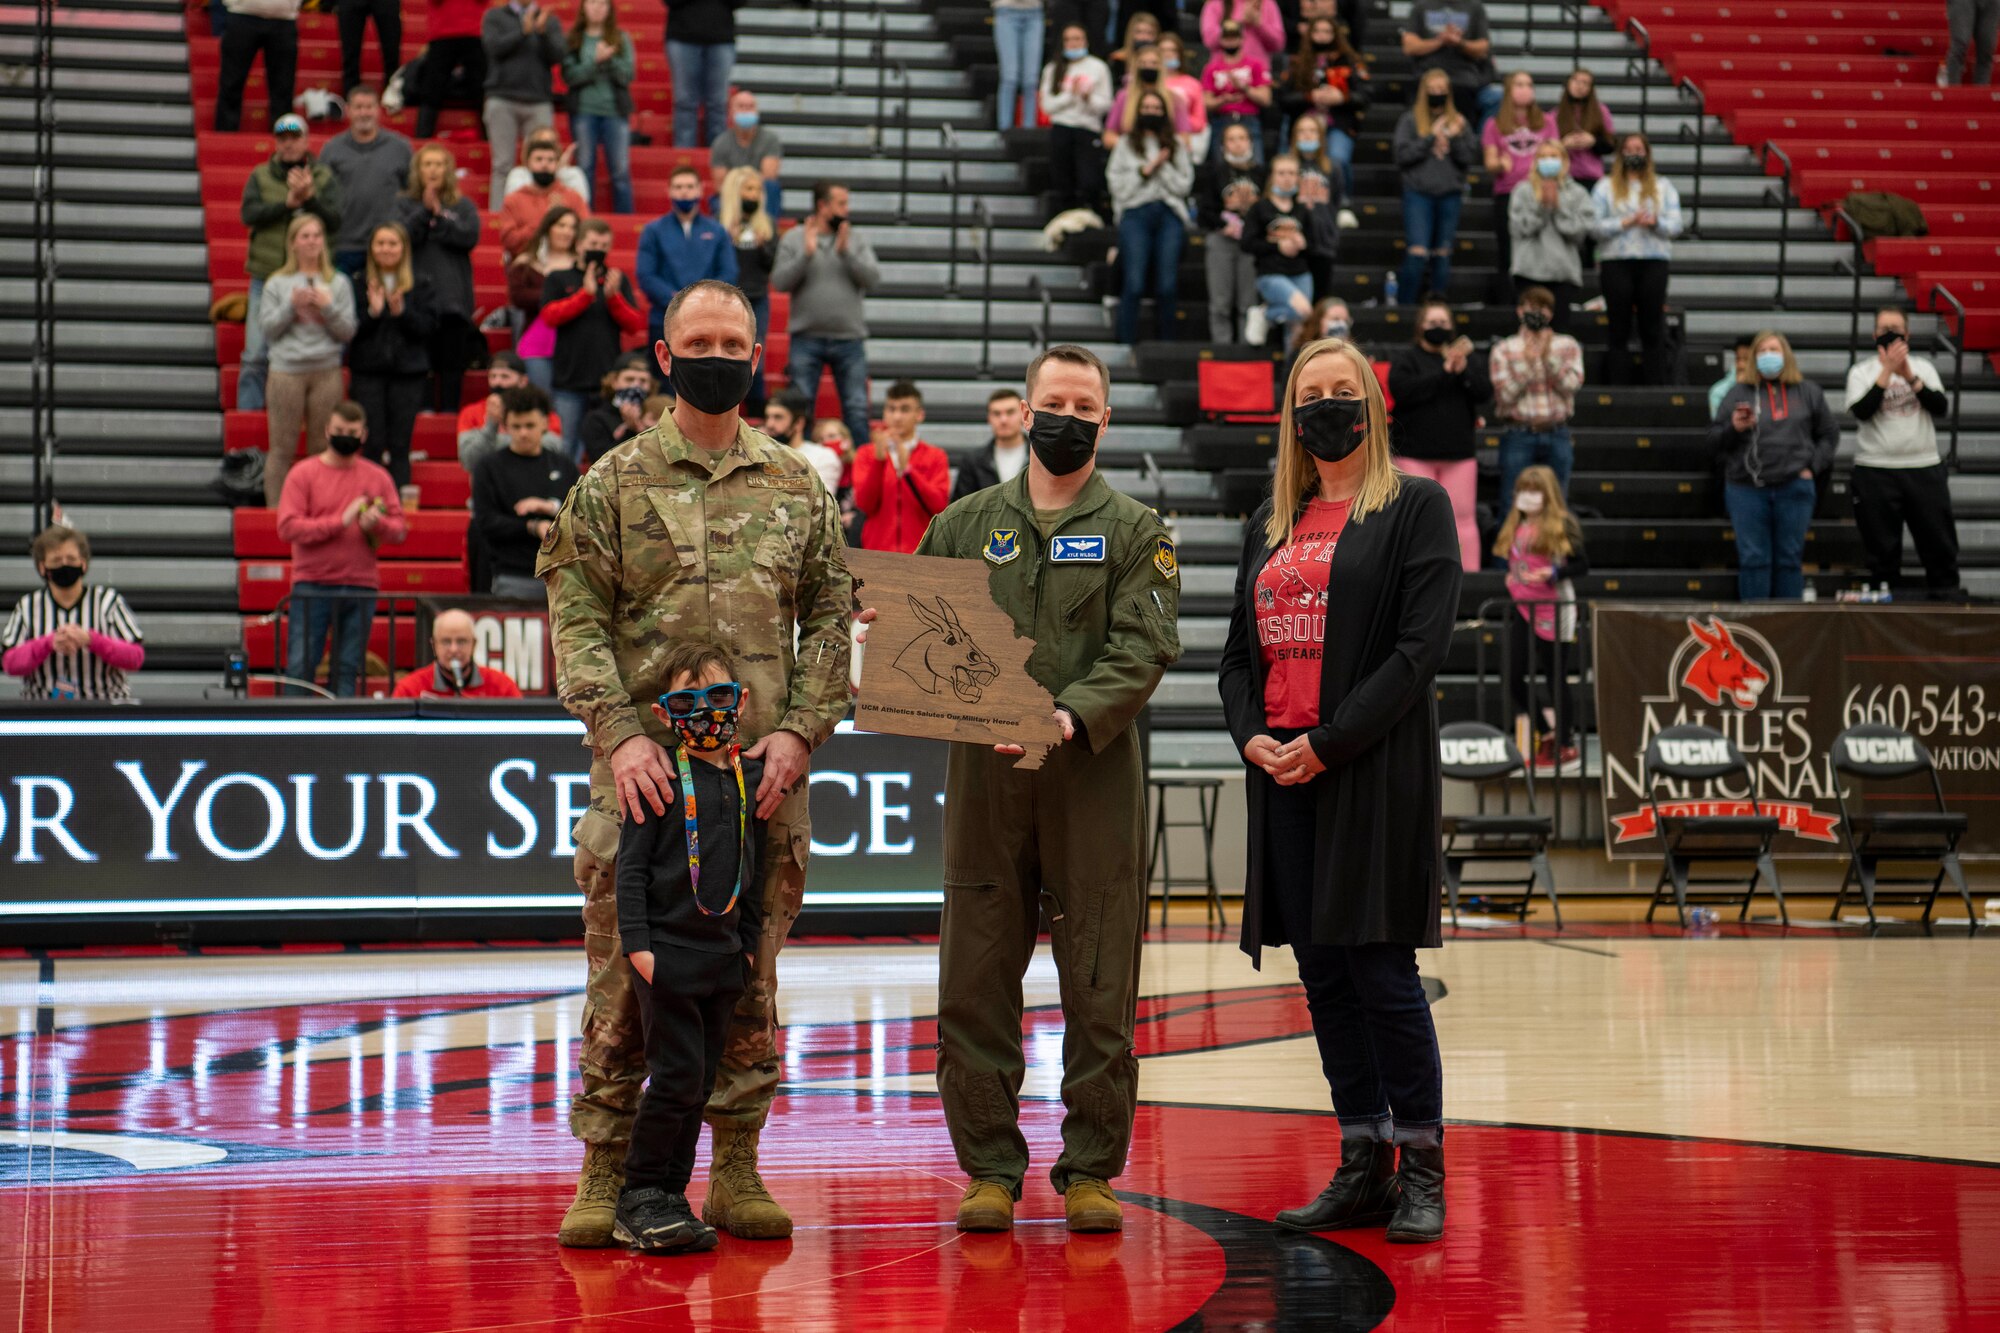 U.S. Air Force Chief Master Sgt. Jason Hodges, 509th Bomb Wing command chief, left, Col. Kyle Wilson, 509th BW vice commander, center, and Lindsay Chapman, University of Central Missouri general counsel, pose for a photo during a recognition ceremony of the UCM Military Appreciation basketball game, Feb. 13, 2021, in Warrensburg, Missouri. Whiteman AFB and UCM share a valuable community partnership that fosters a supportive relationship between the base and local communities. (U.S. Air Force photo by Tech. Sgt. Dylan Nuckolls)